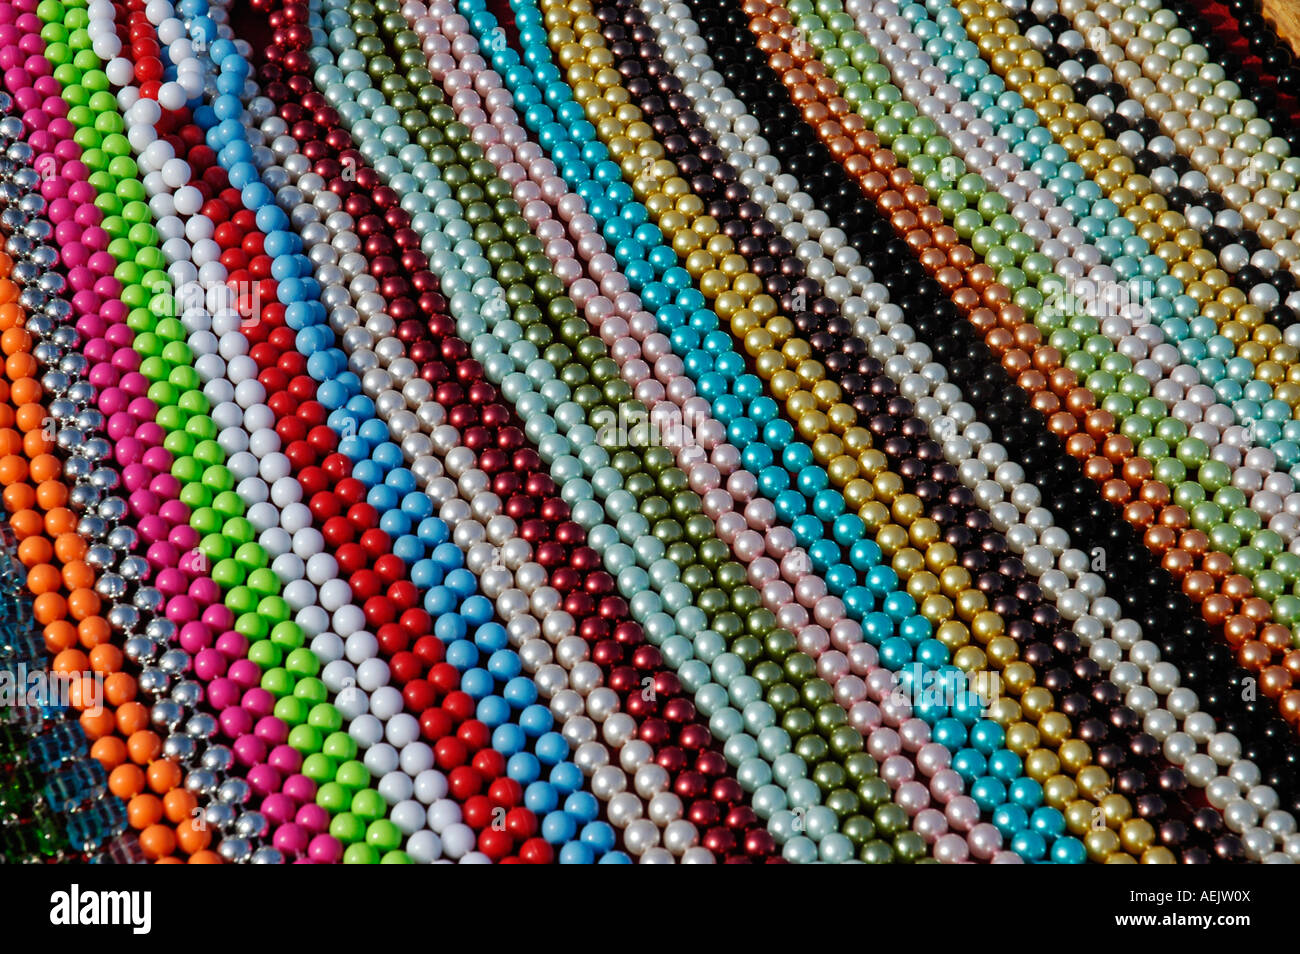 Sale stand with colourful pearl necklets, weekly market, Altea, Costa Blanca, Spain Stock Photo